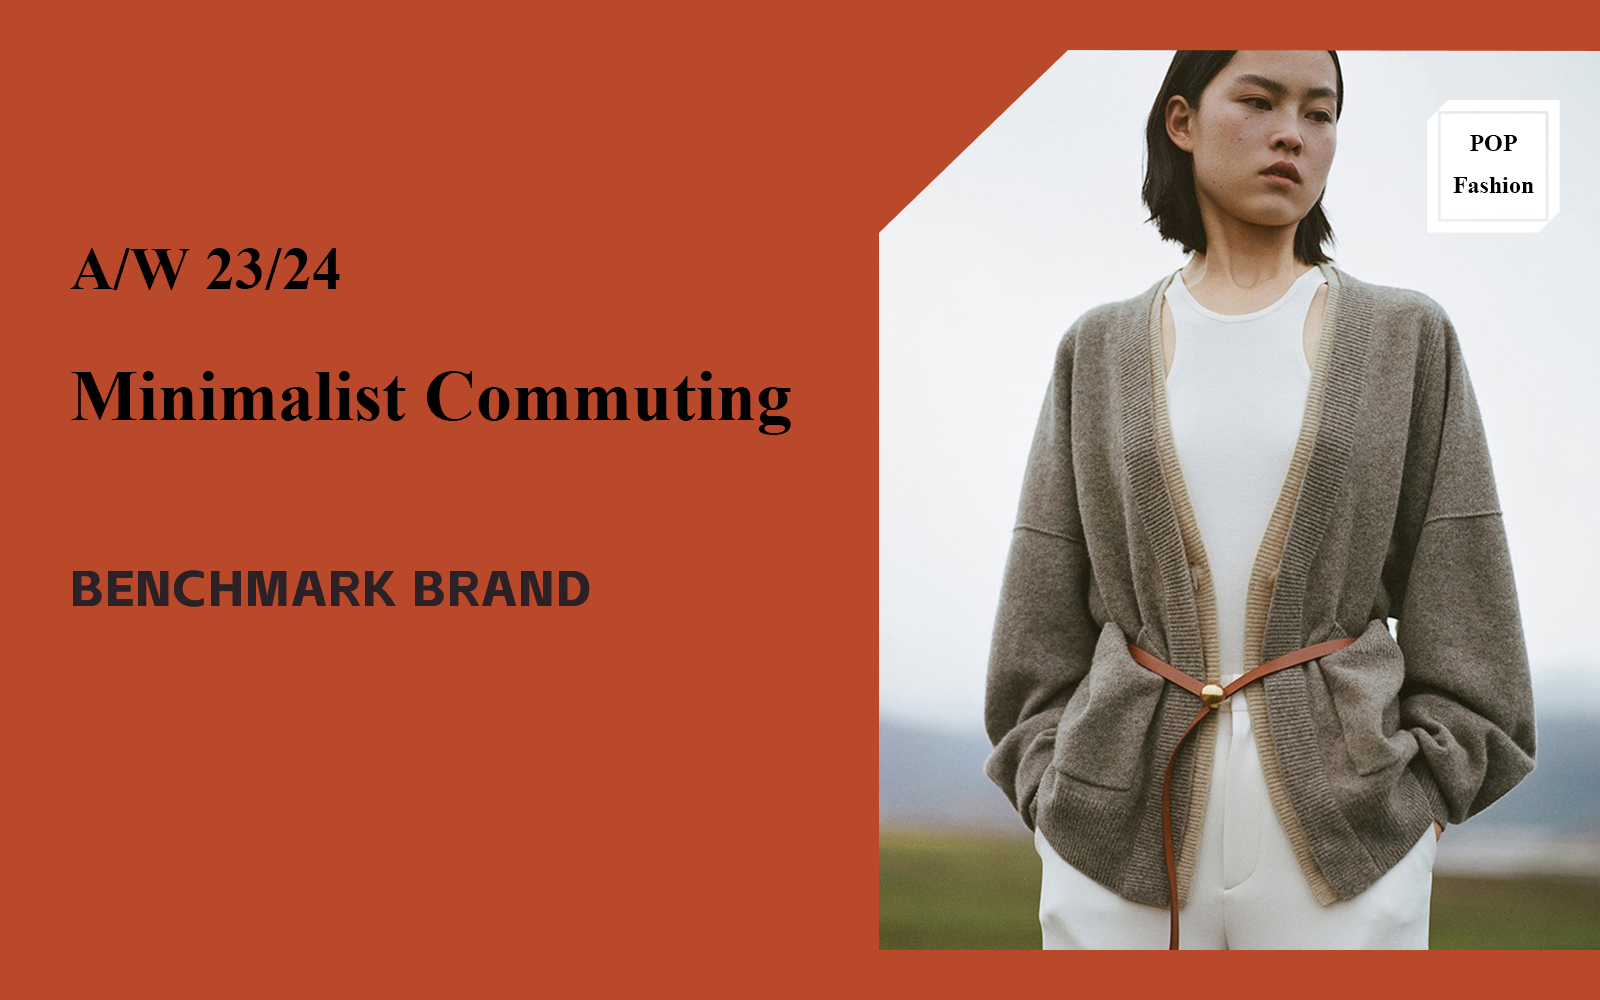 Elegant Commuter -- The Comprehensive Analysis of Chinese Benchmark Brands